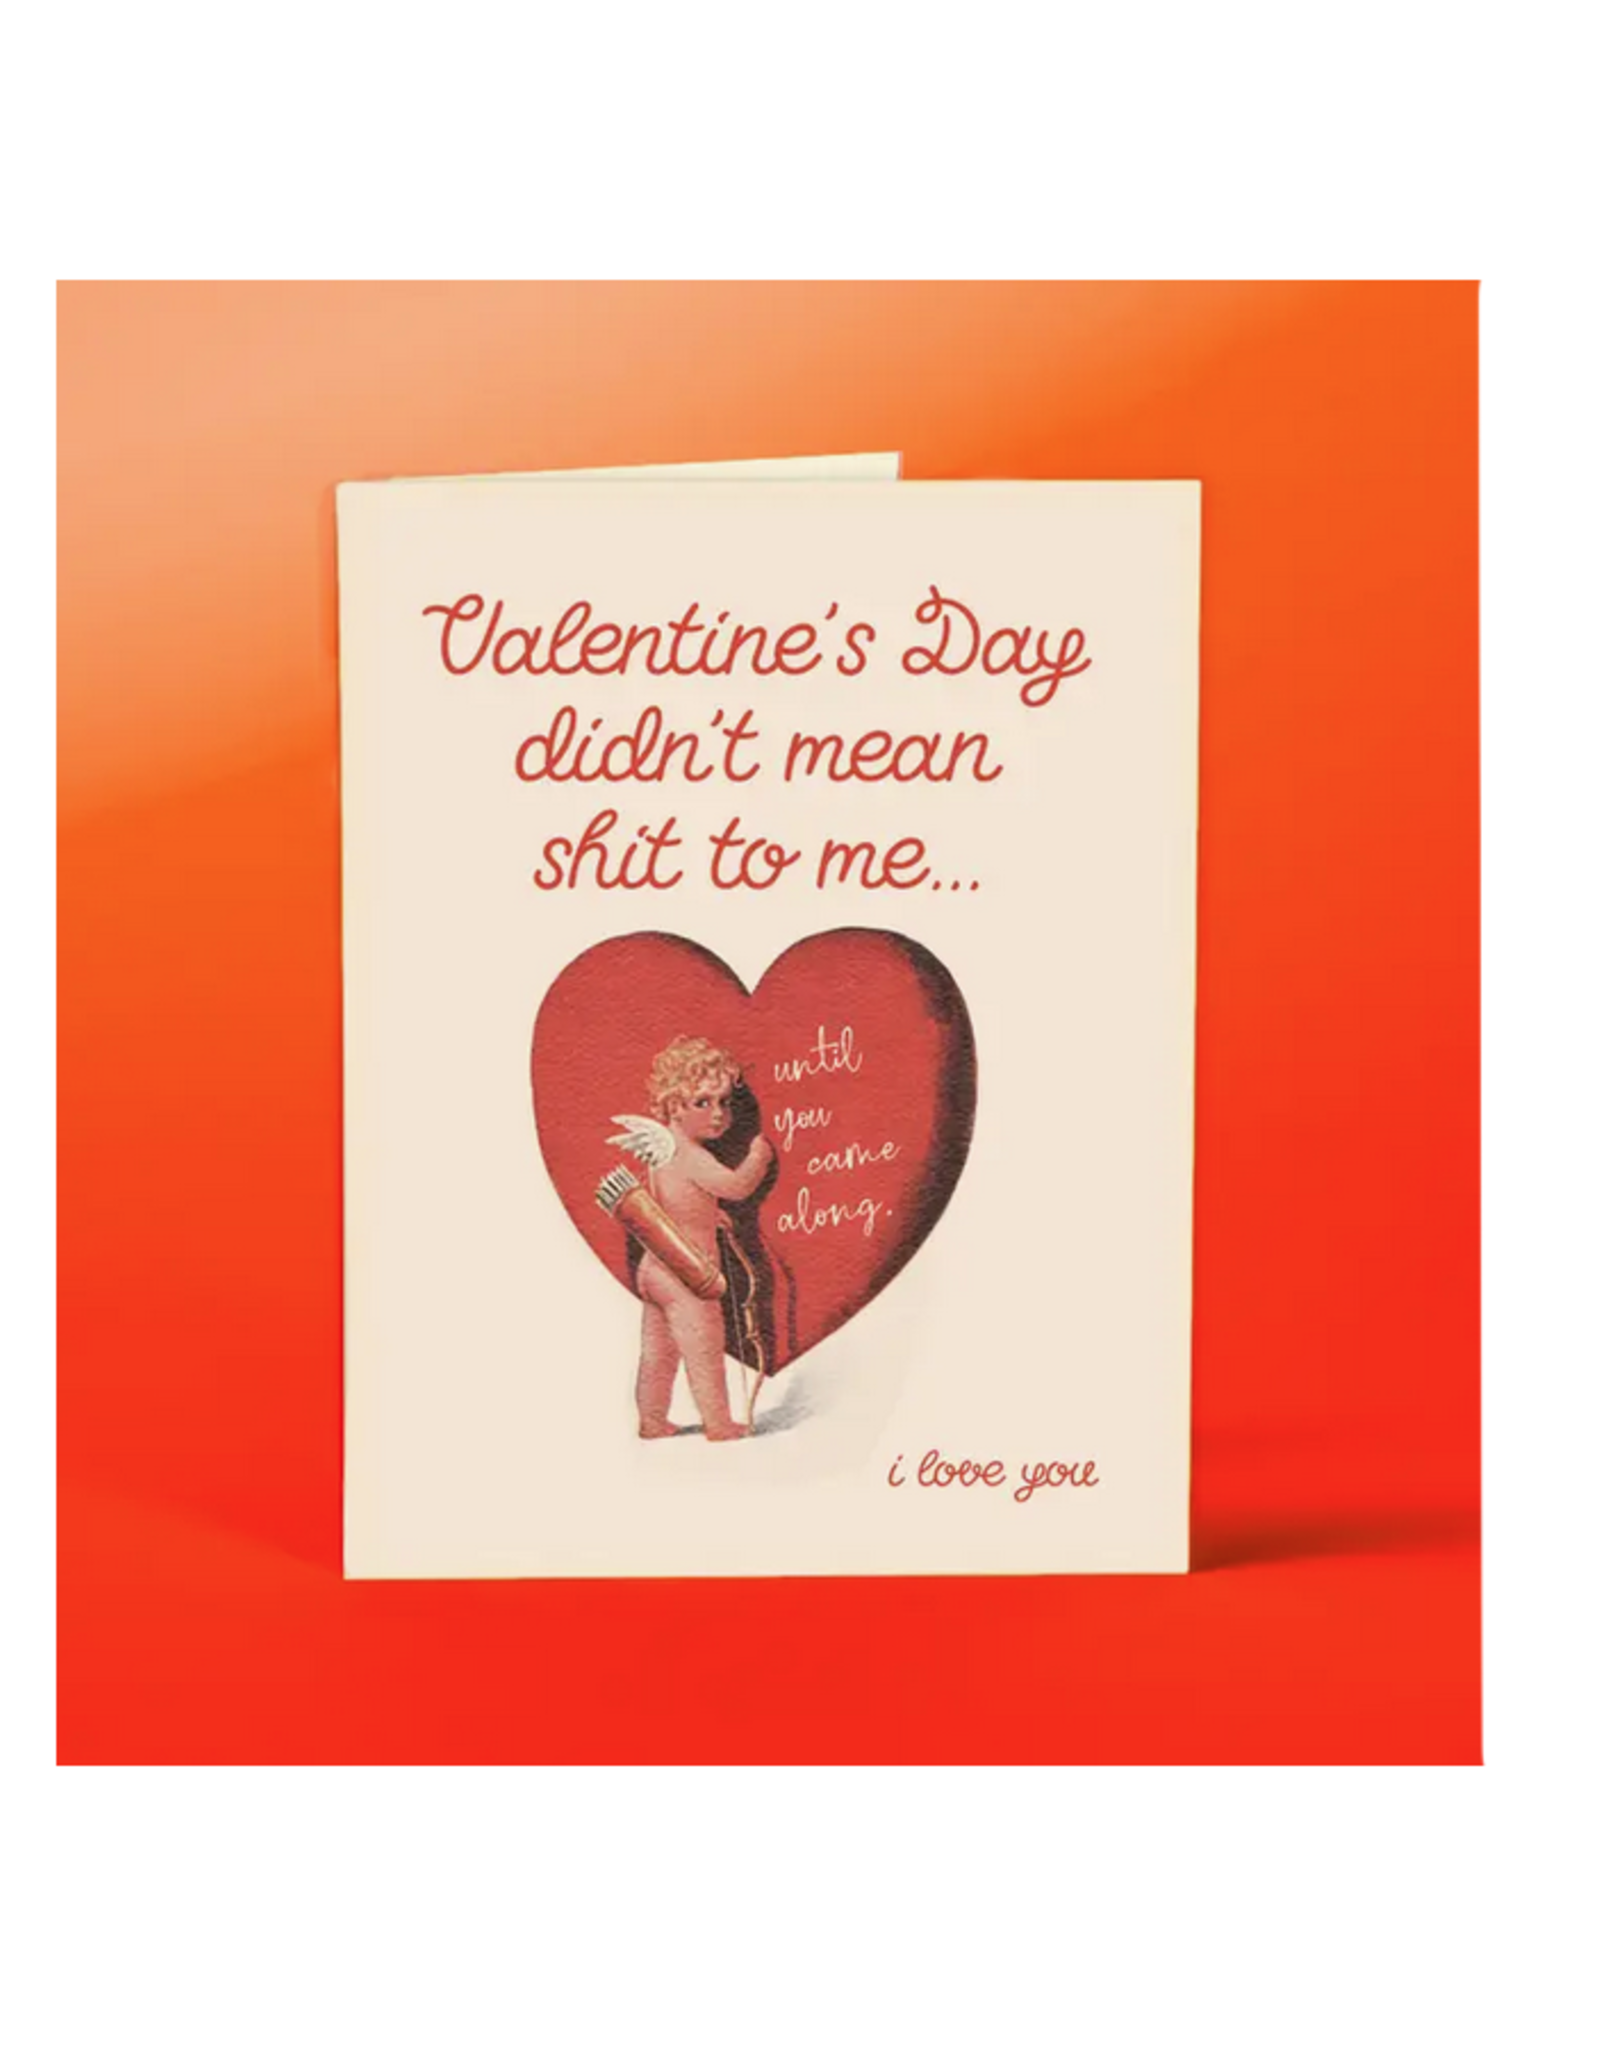 Valentine's Day Didn't Mean Shit To Me Greeting Card